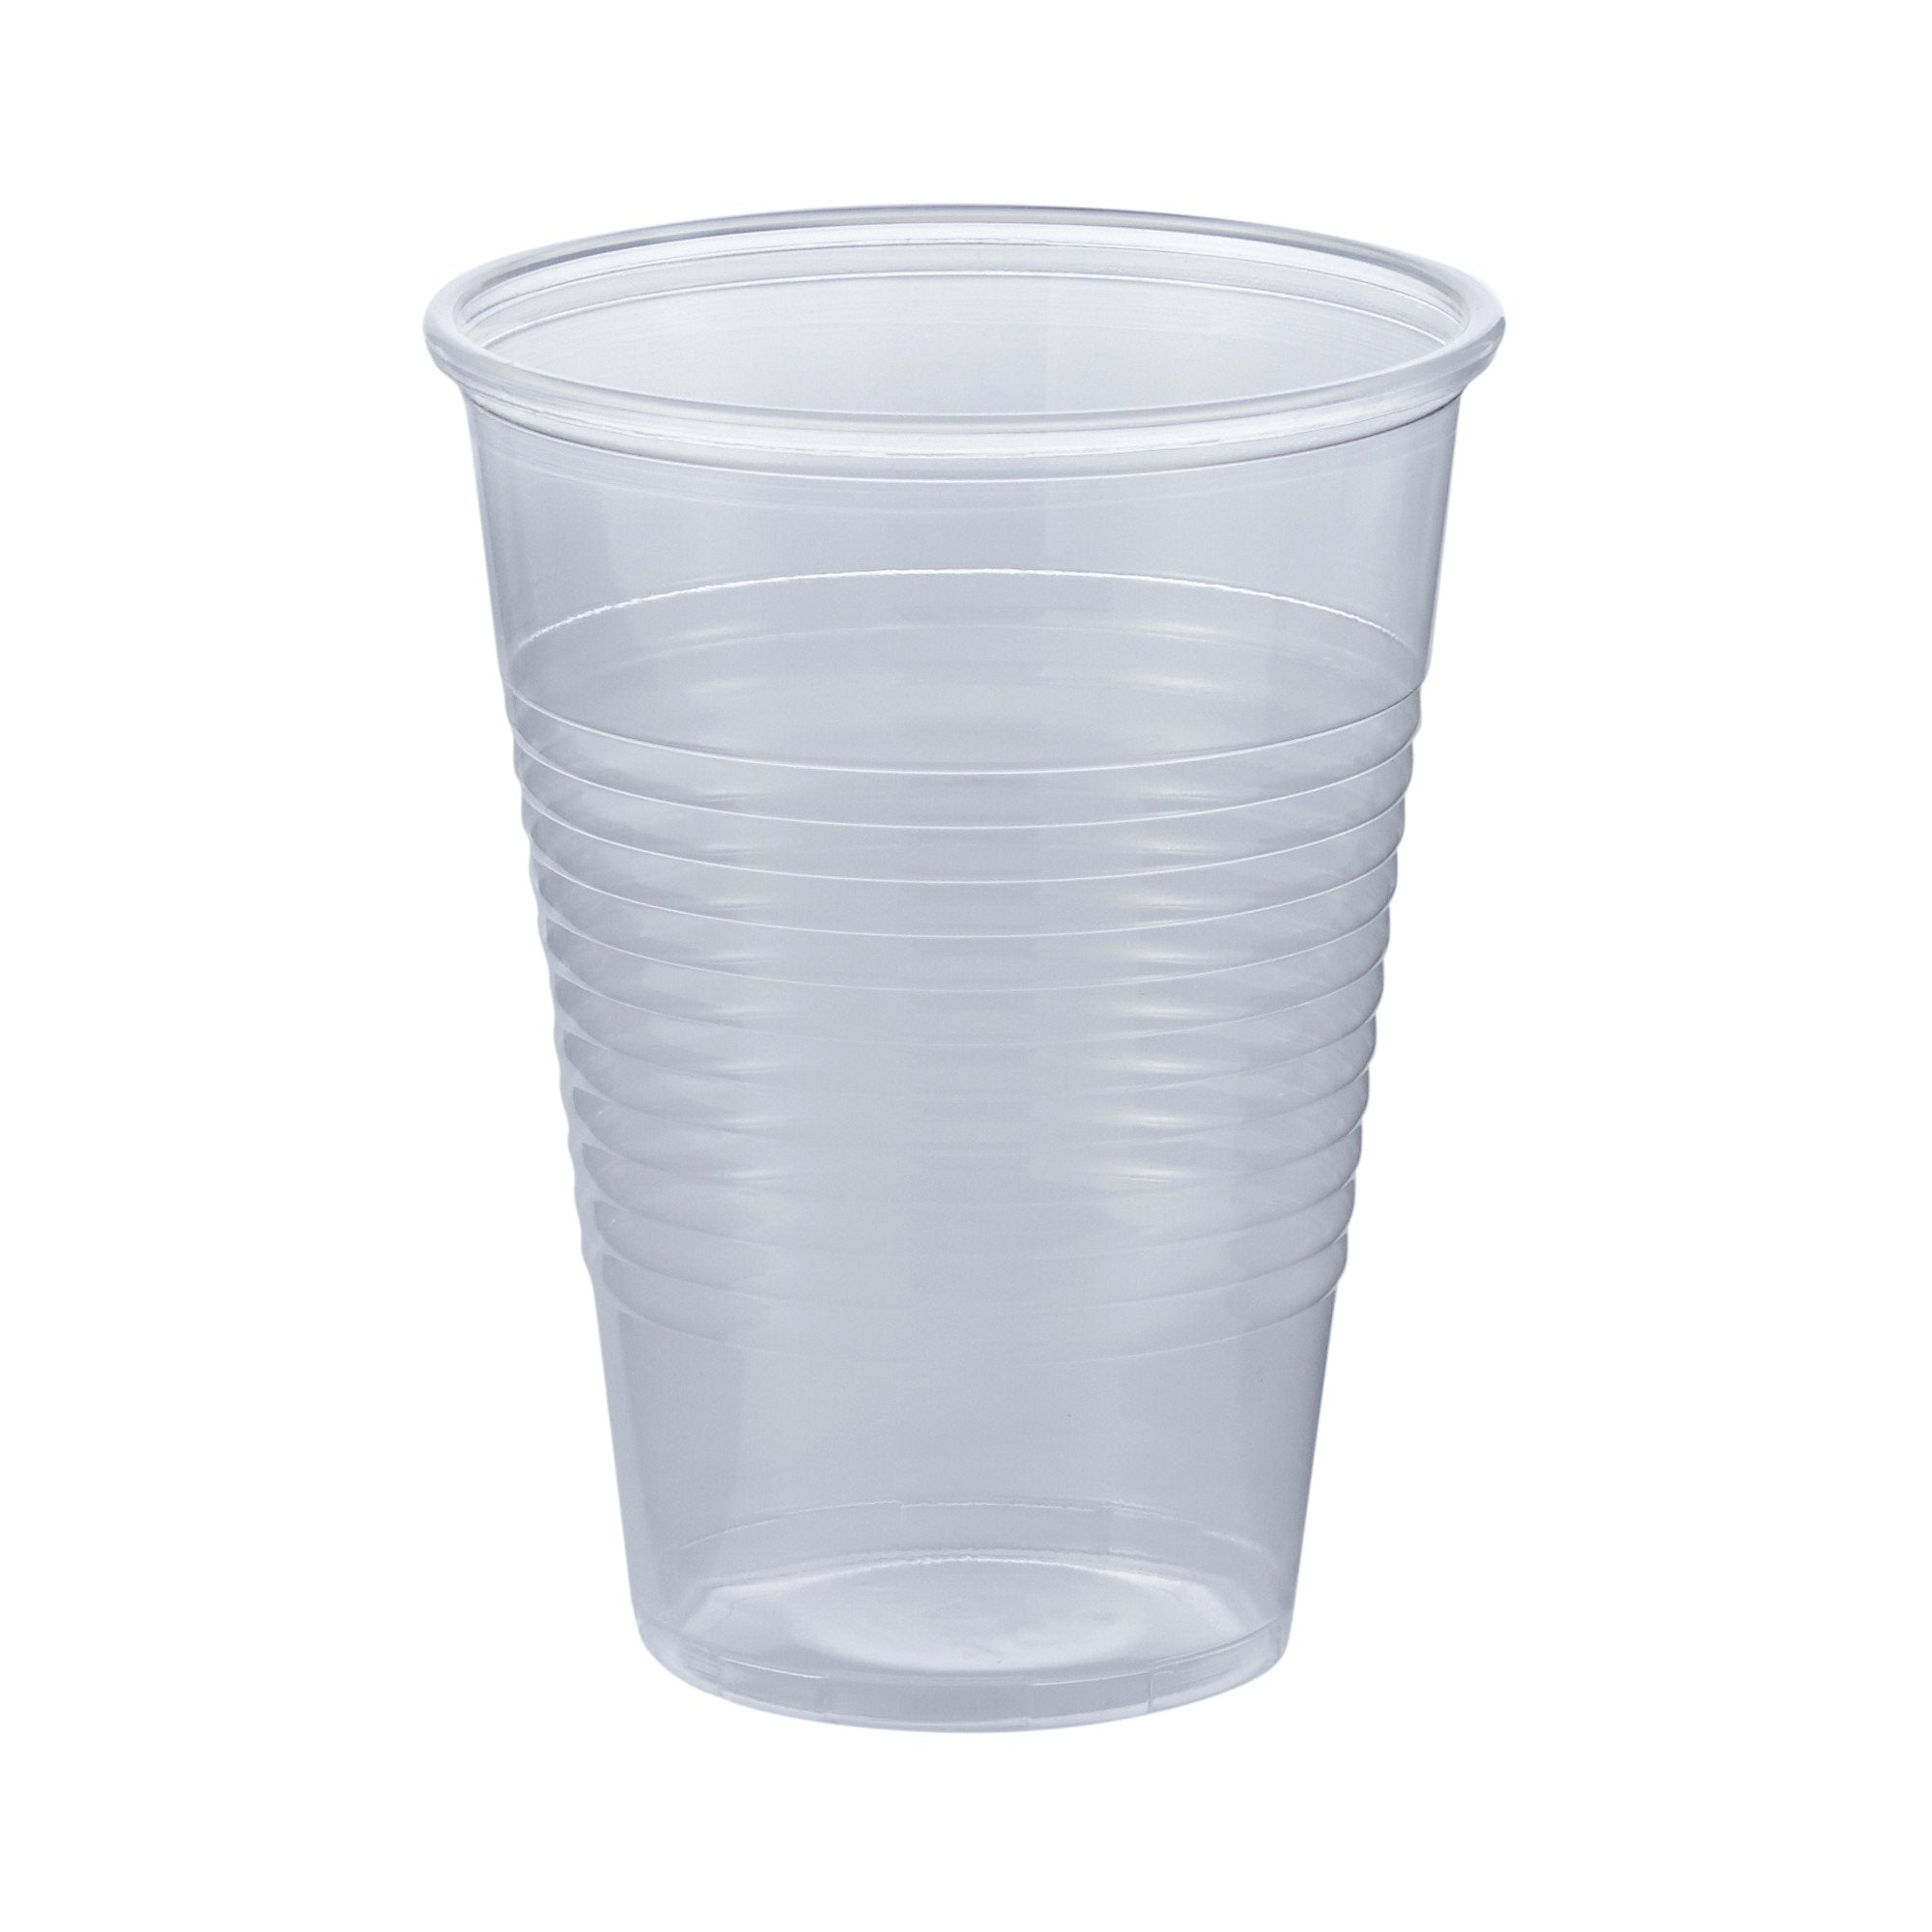 McKesson 9oz Clear Disposable Polypropylene Cups (100-Pack)